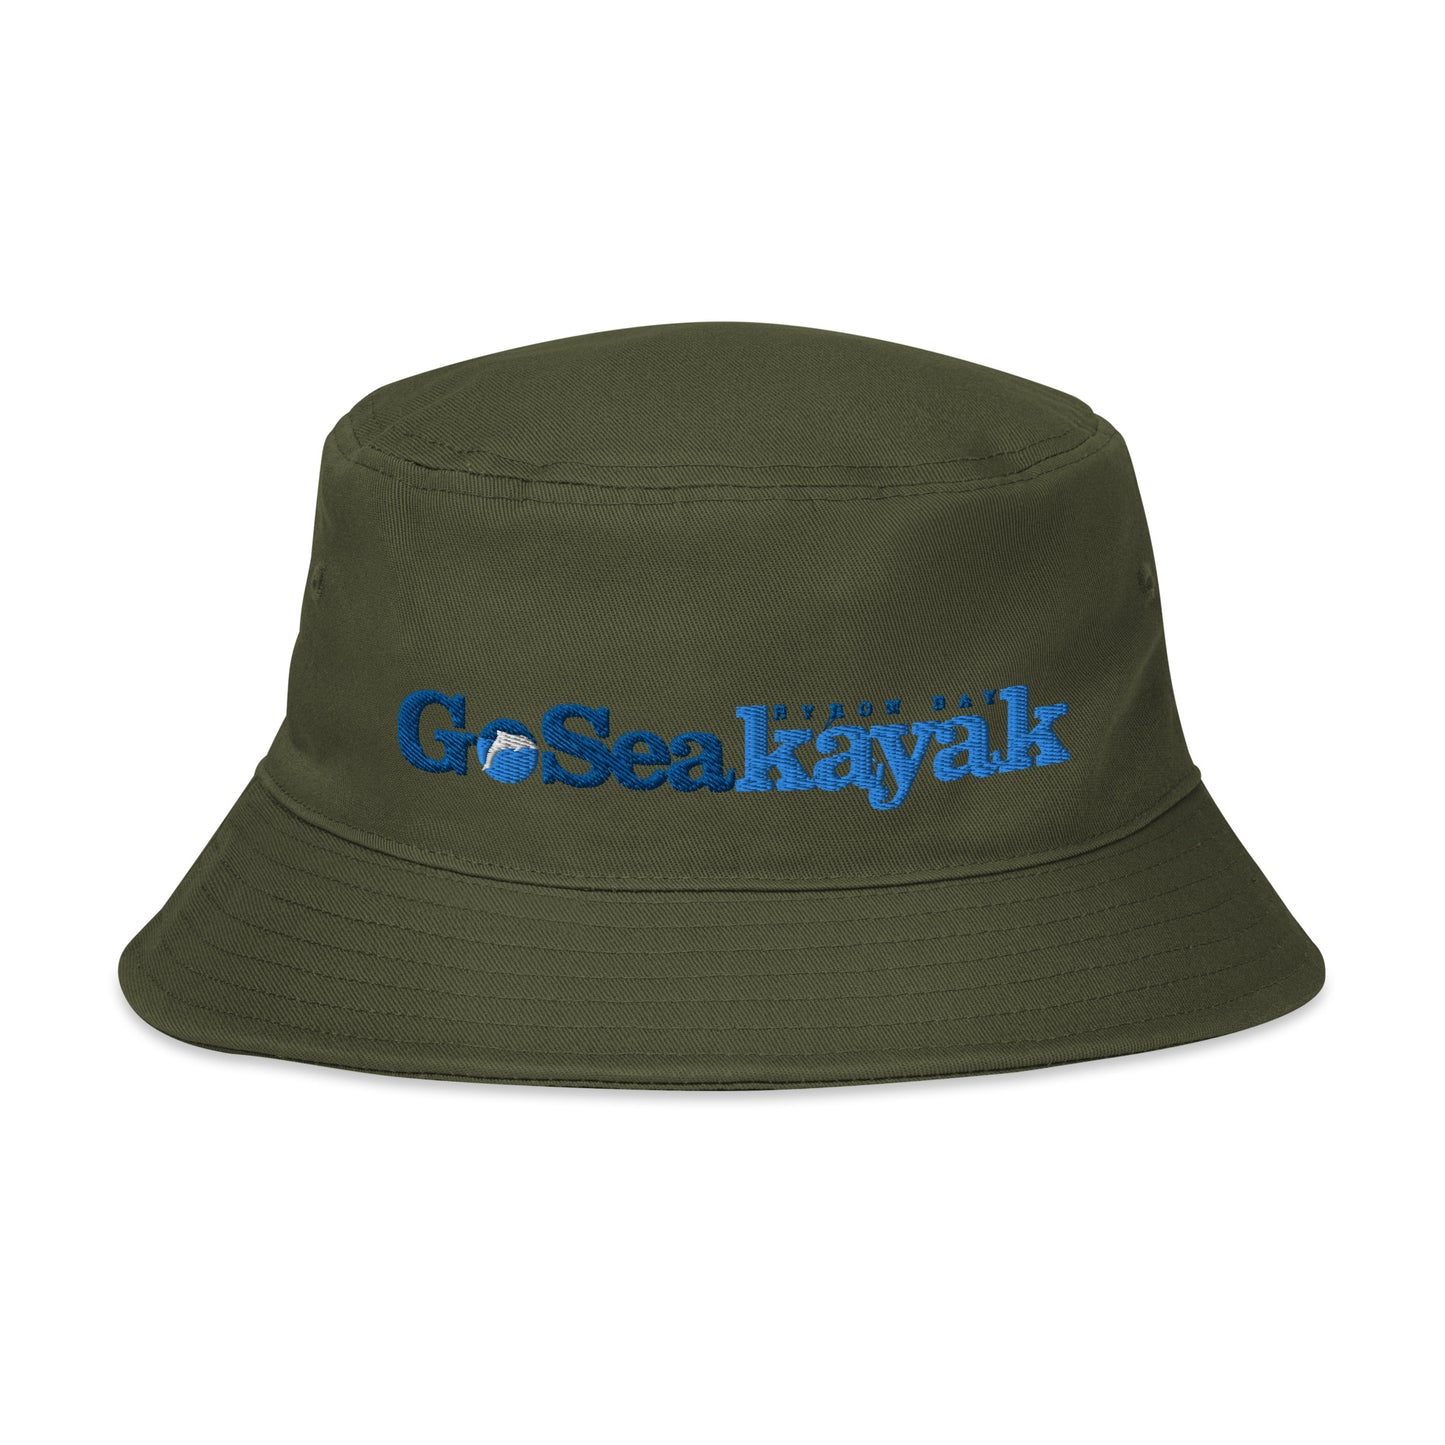  Unisex Bucket Hat - Army Green - Front view - Go Sea Kayak Byron Bay logo on front  - Genuine Byron Bay Merchandise | Produced by Go Sea Kayak Byron Bay